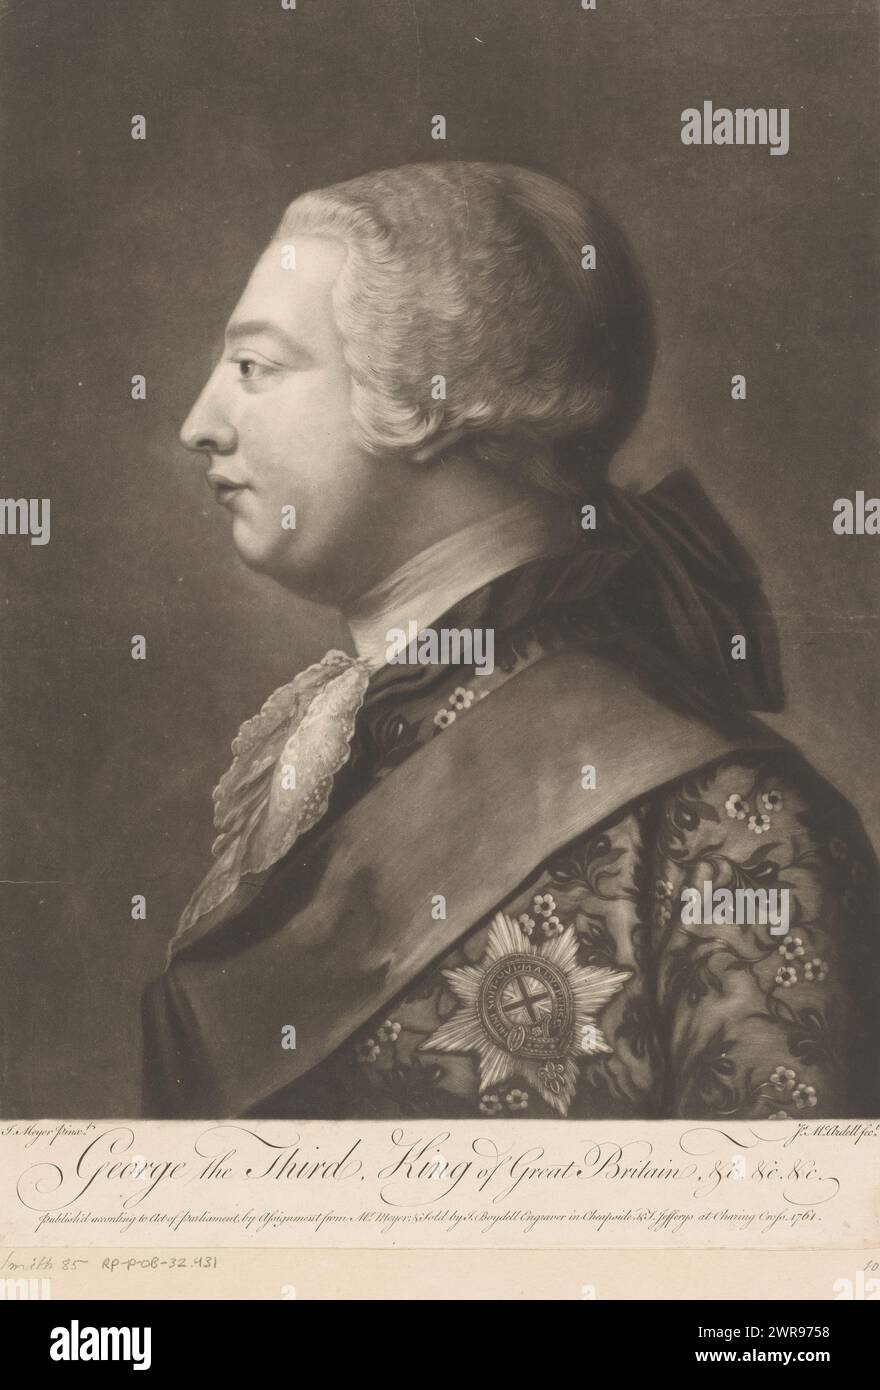 Portrait of George III of the United Kingdom, George the Third, King of Great Britain, &c. &c. &c. (title on object), print maker: James McArdell, after painting by: Jeremias Meyer, publisher: James McArdell, London, 1761, paper, height 504 mm × width 355 mm, print Stock Photo